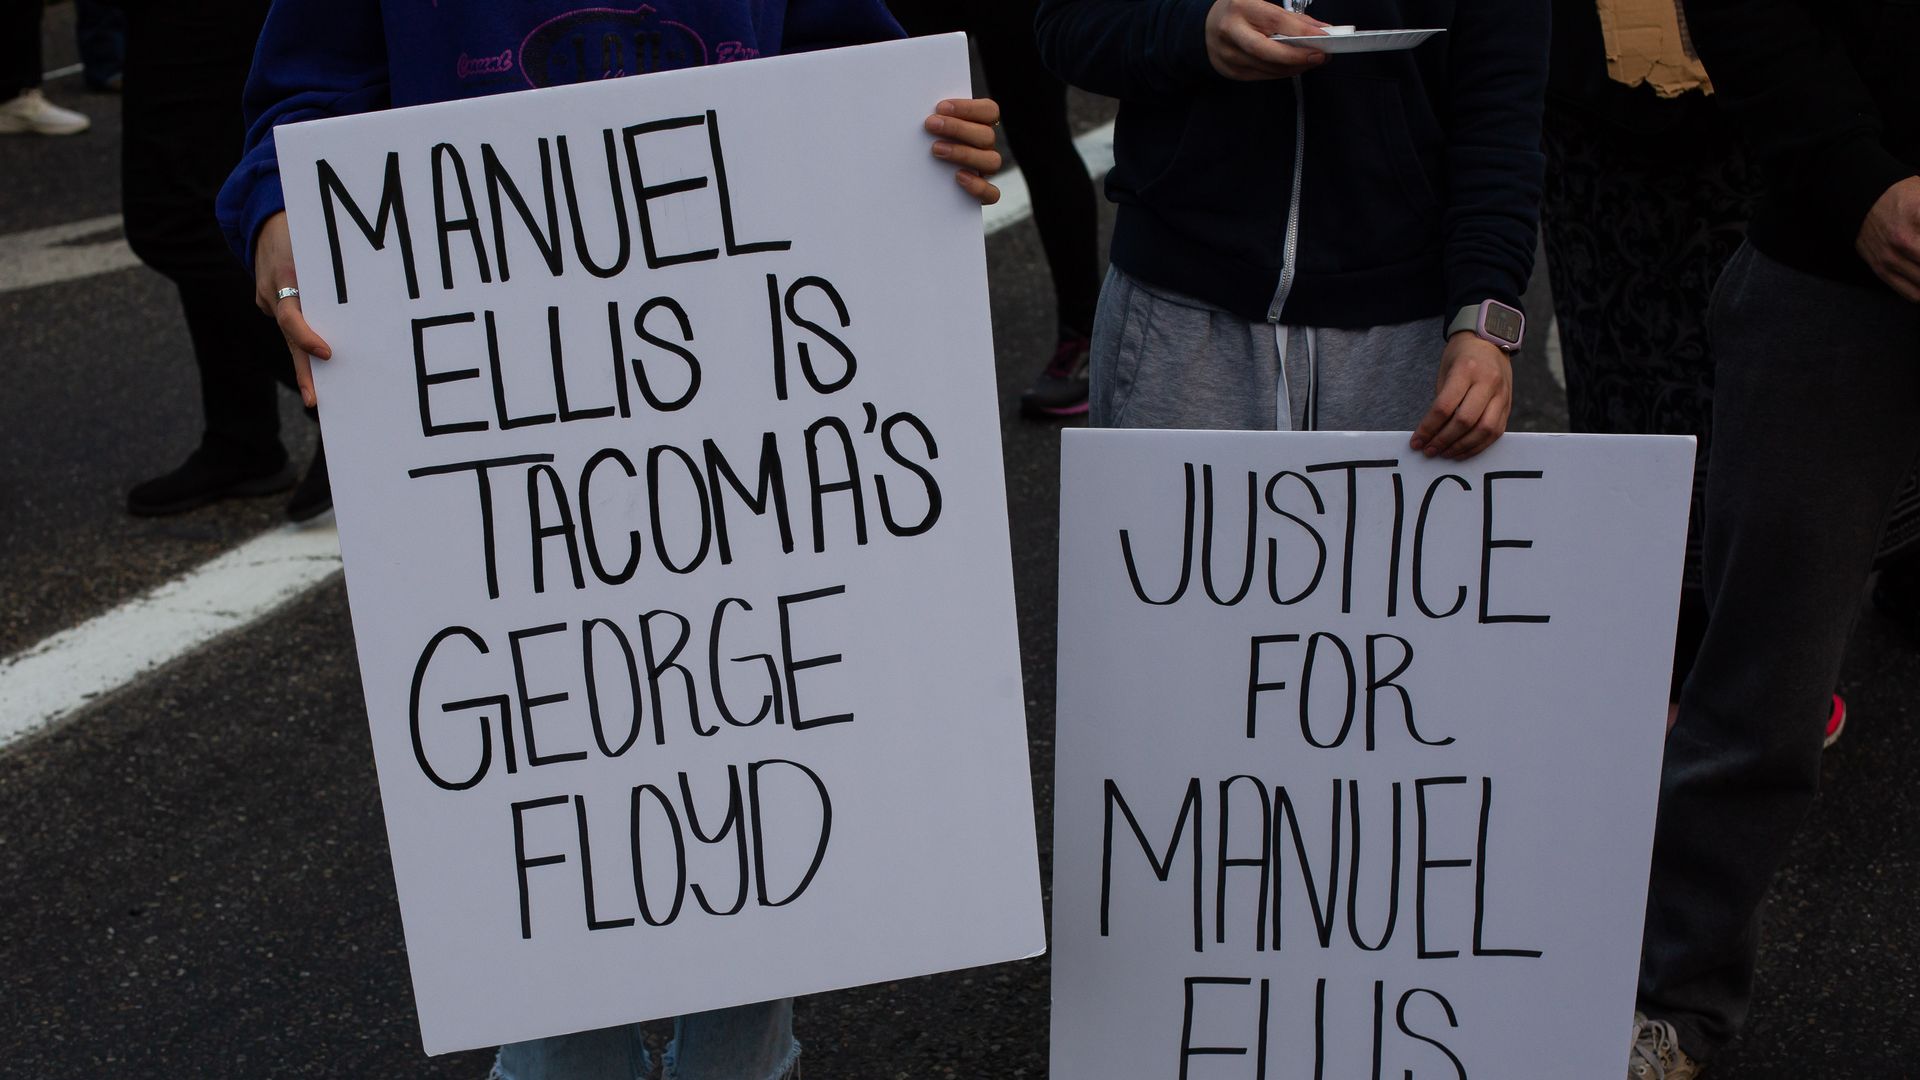 People hold signs during a vigil for Manuel Ellis, a black man whose March death while in Tacoma Police custody